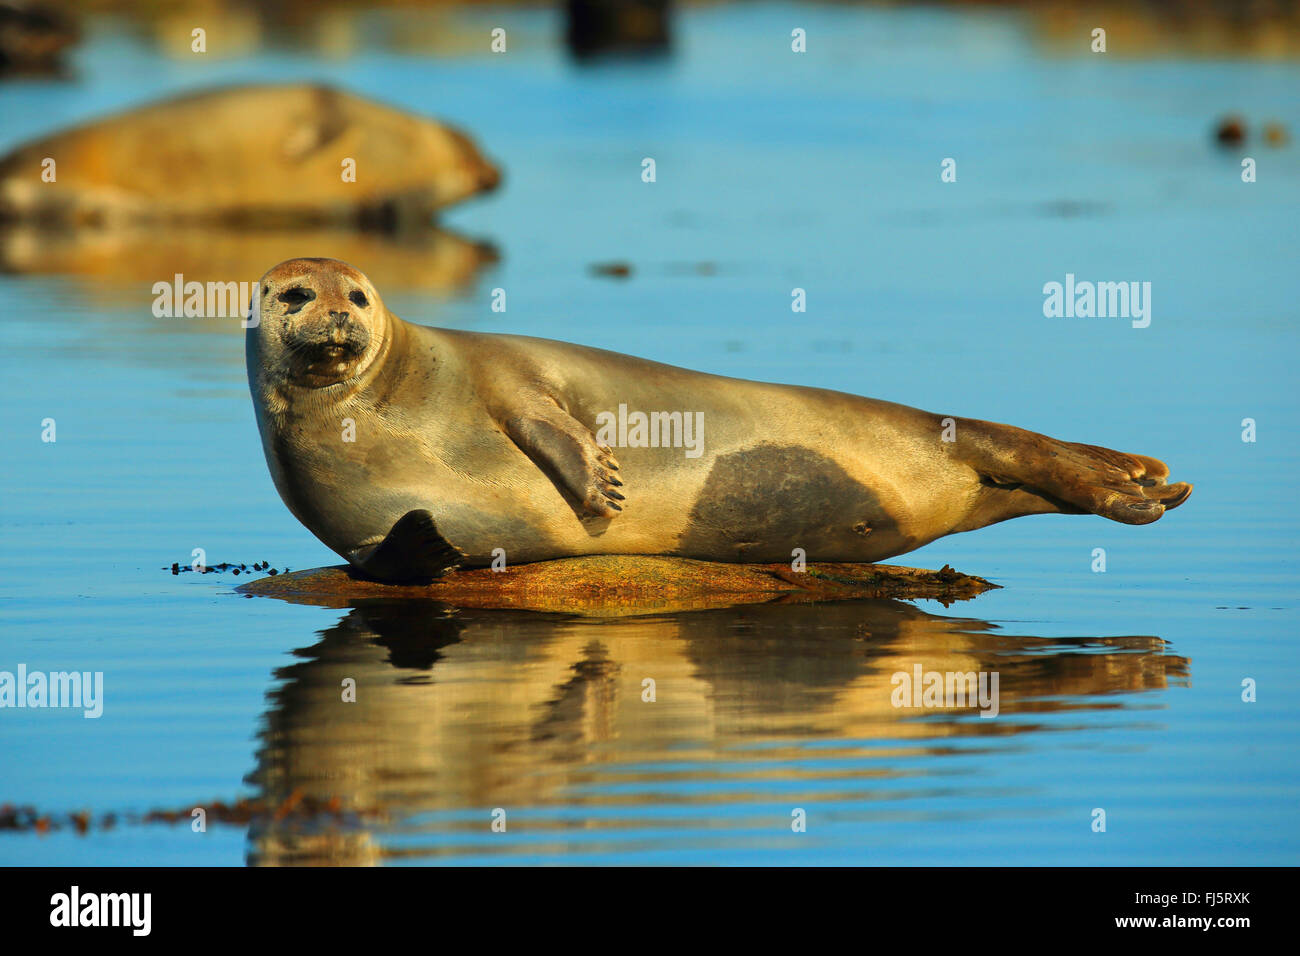 harbor seal, common seal (Phoca vitulina), lys on a stone in water, Norway, Svalbard, Magdalenenfjord Stock Photo